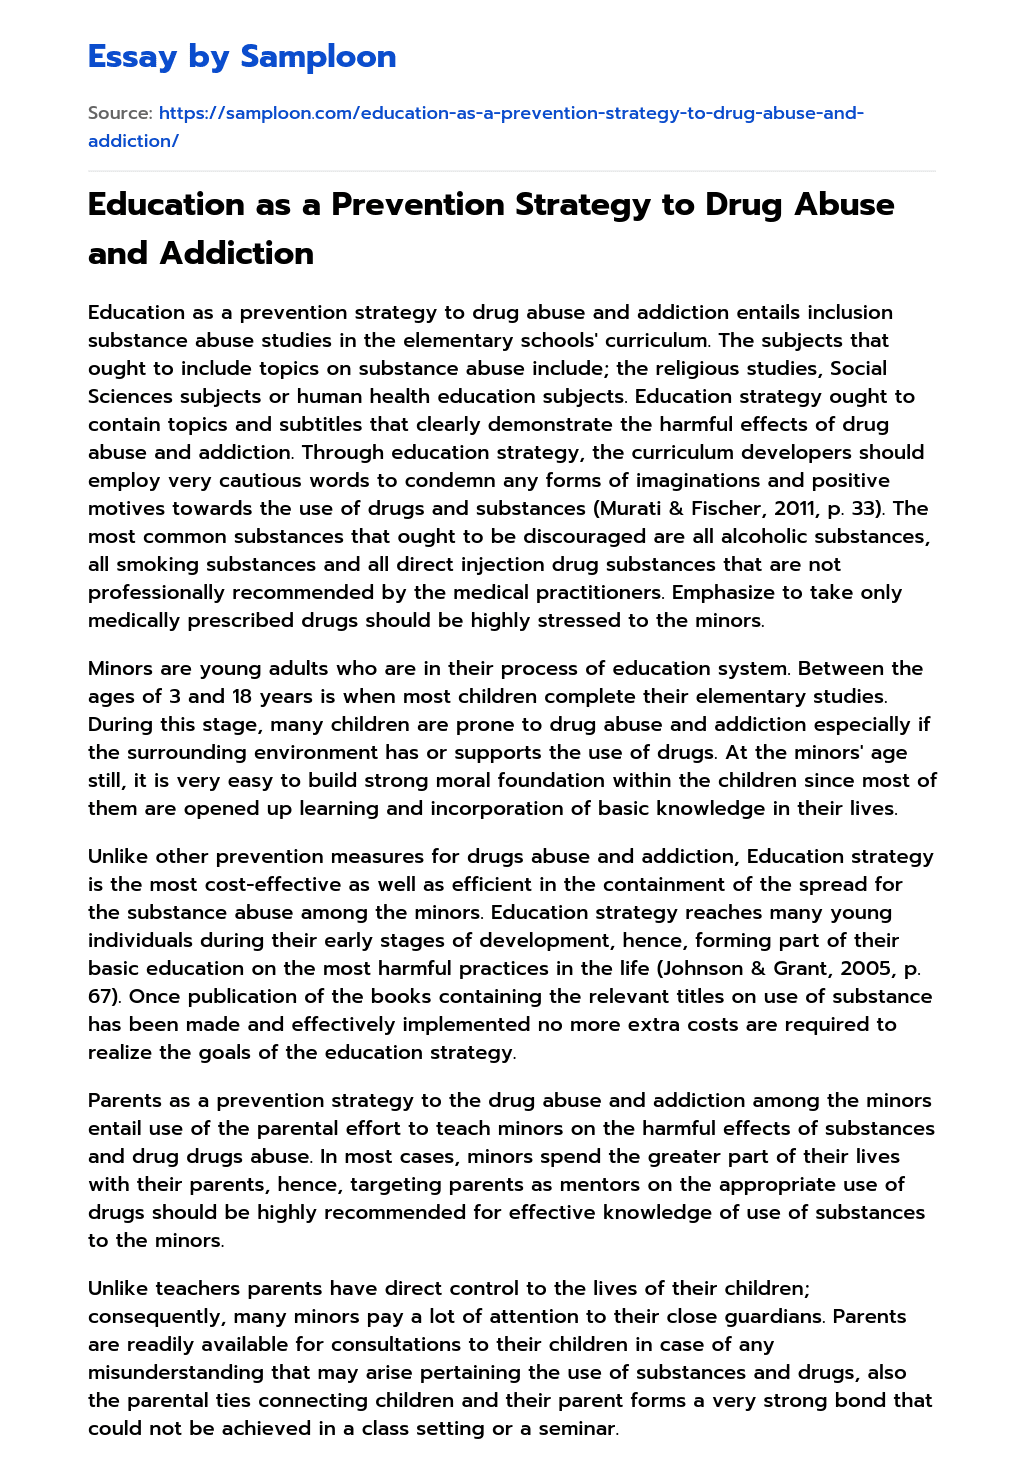 Education as a Prevention Strategy to Drug Abuse and Addiction essay